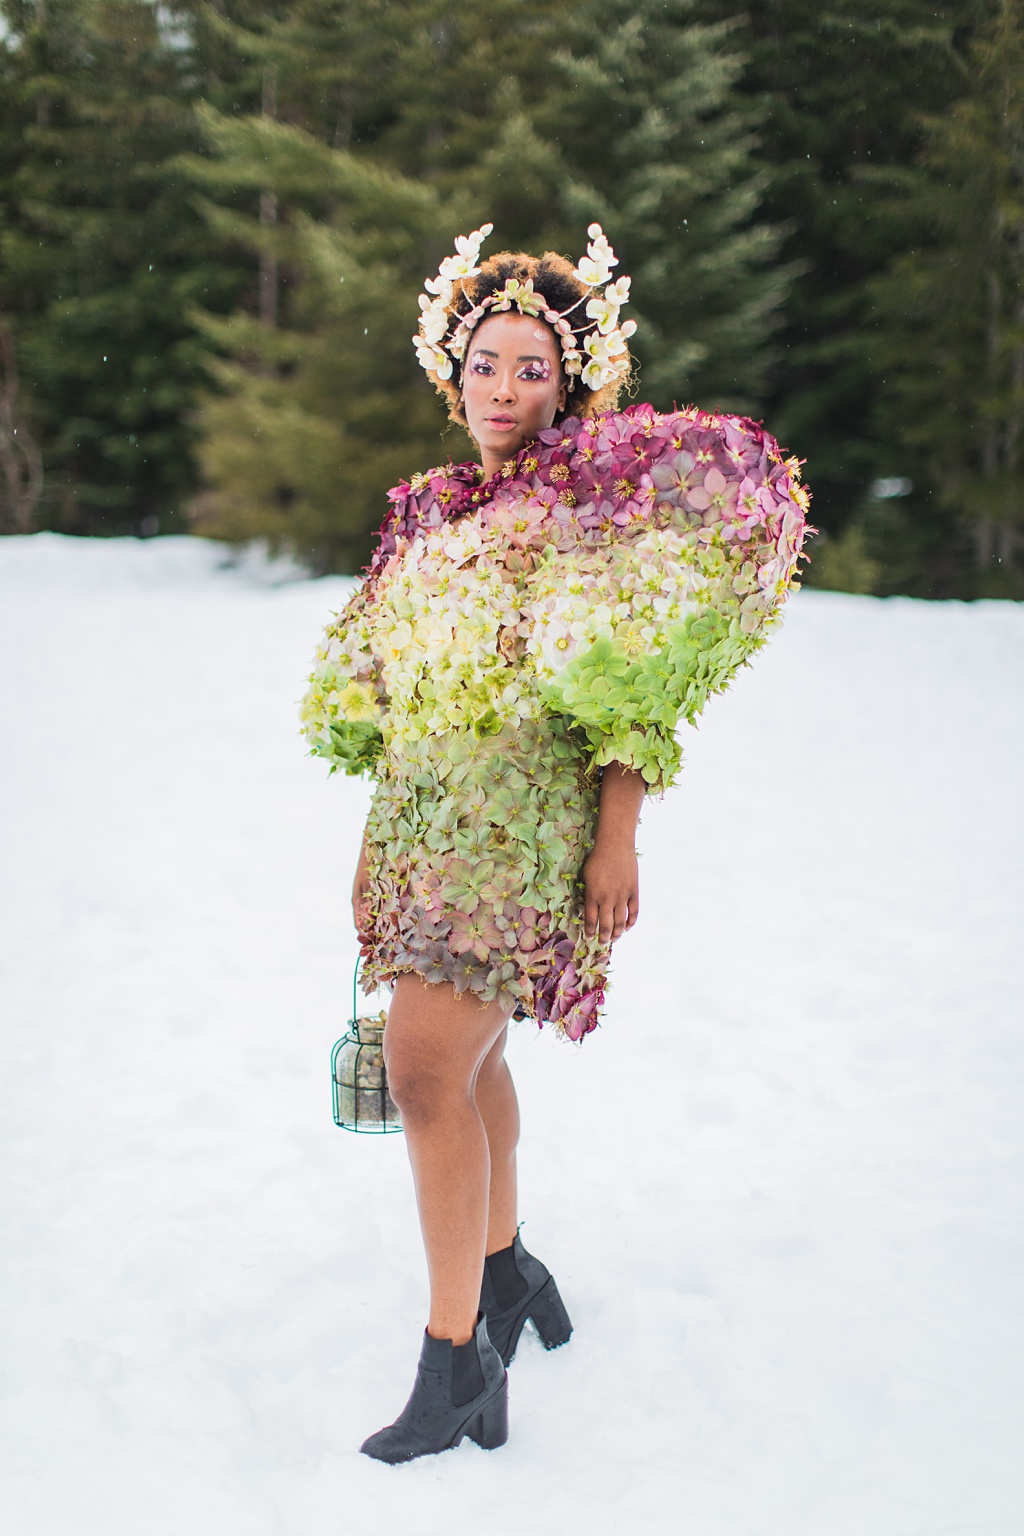 The full botanical couture flower dress look